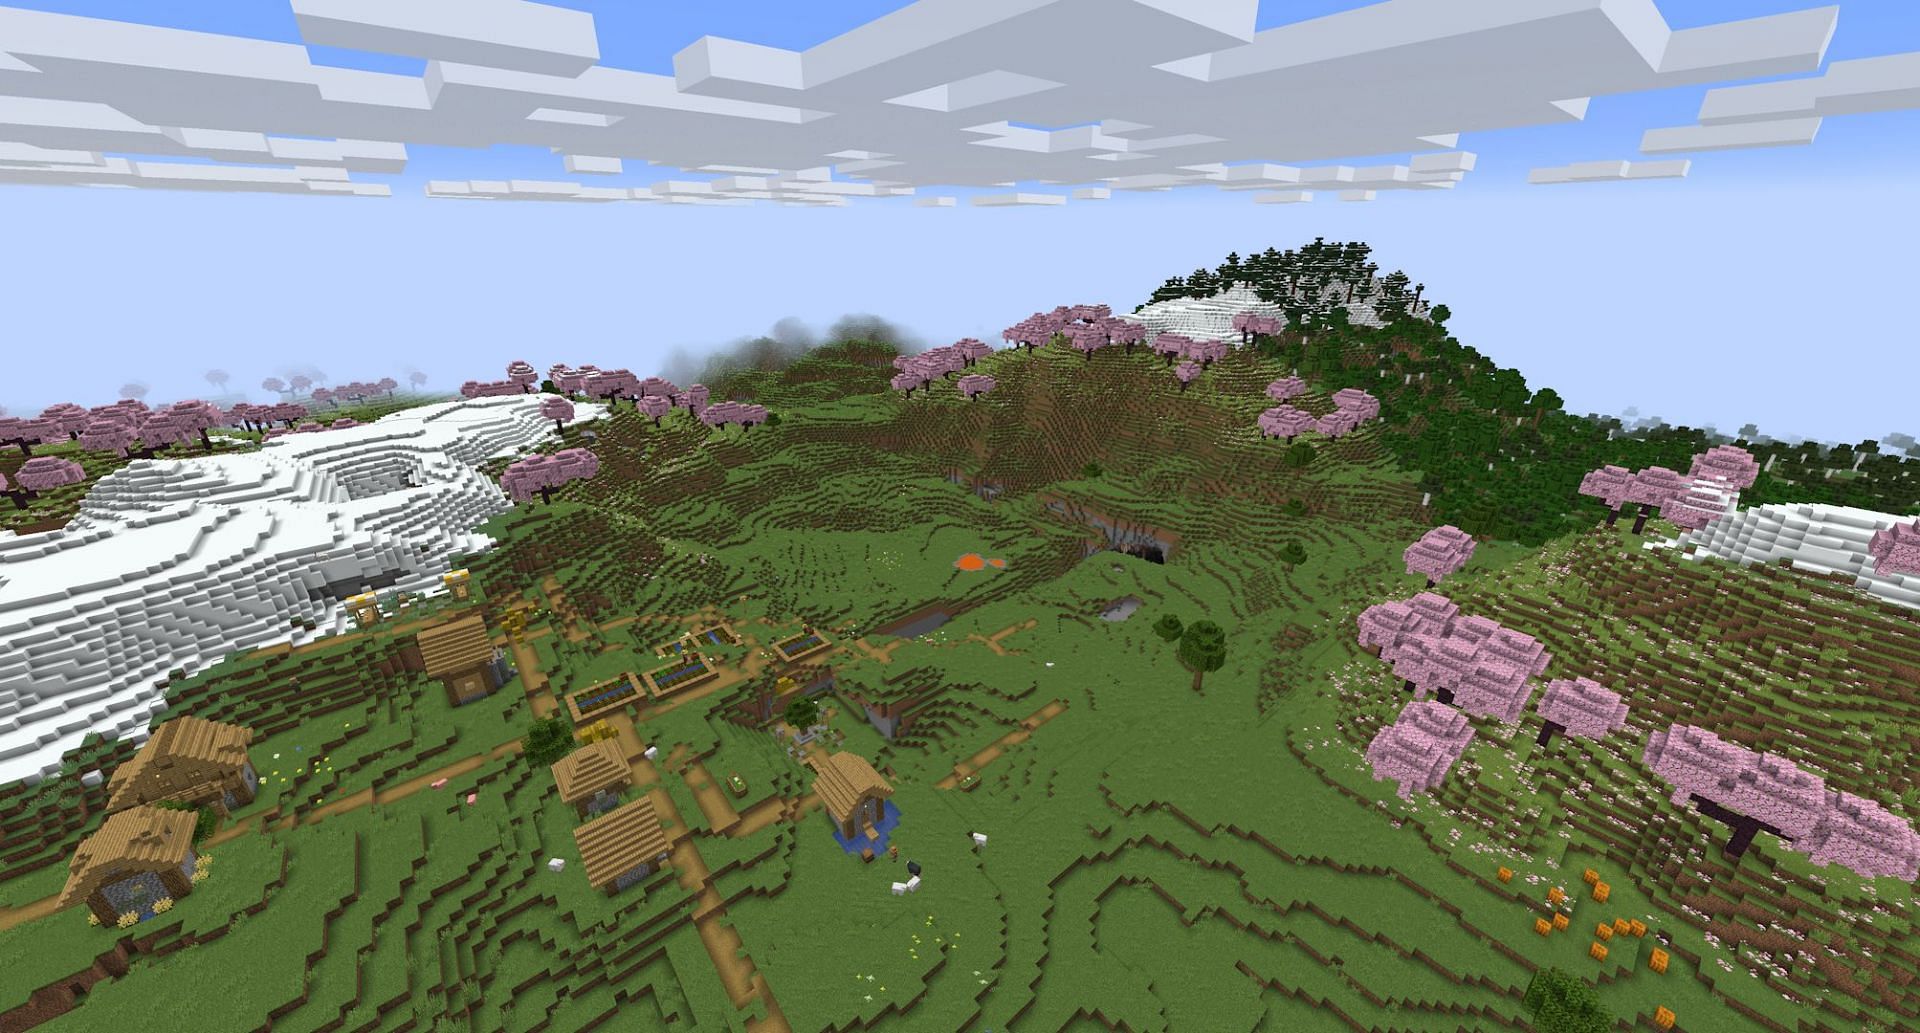 The mountaintop village surrounded by cherry groves. (Image via Mojang)